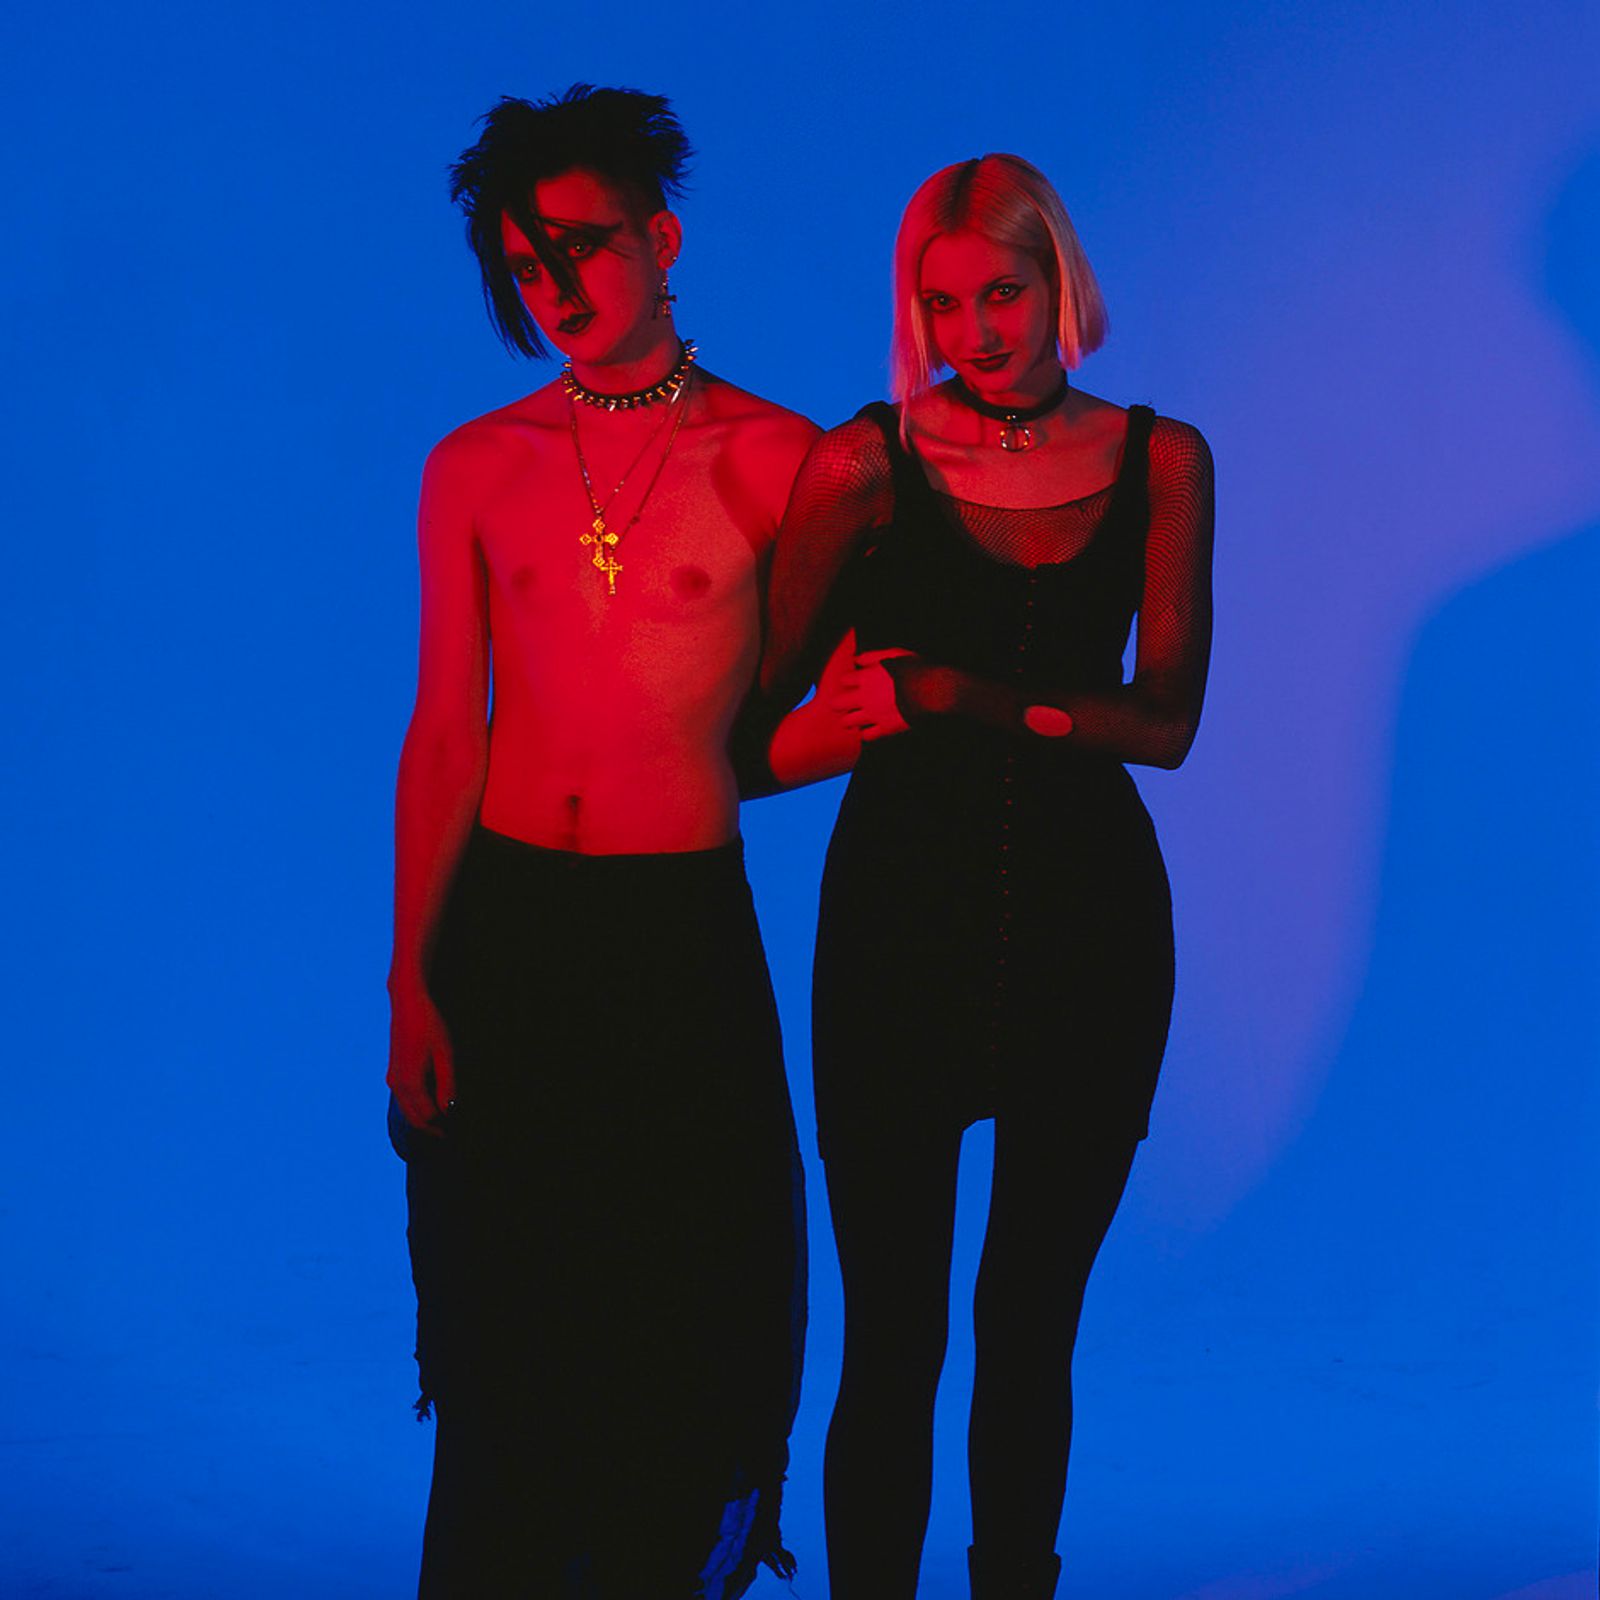 © Steven Edson - Portrait of Goth couple in red light against a blue background